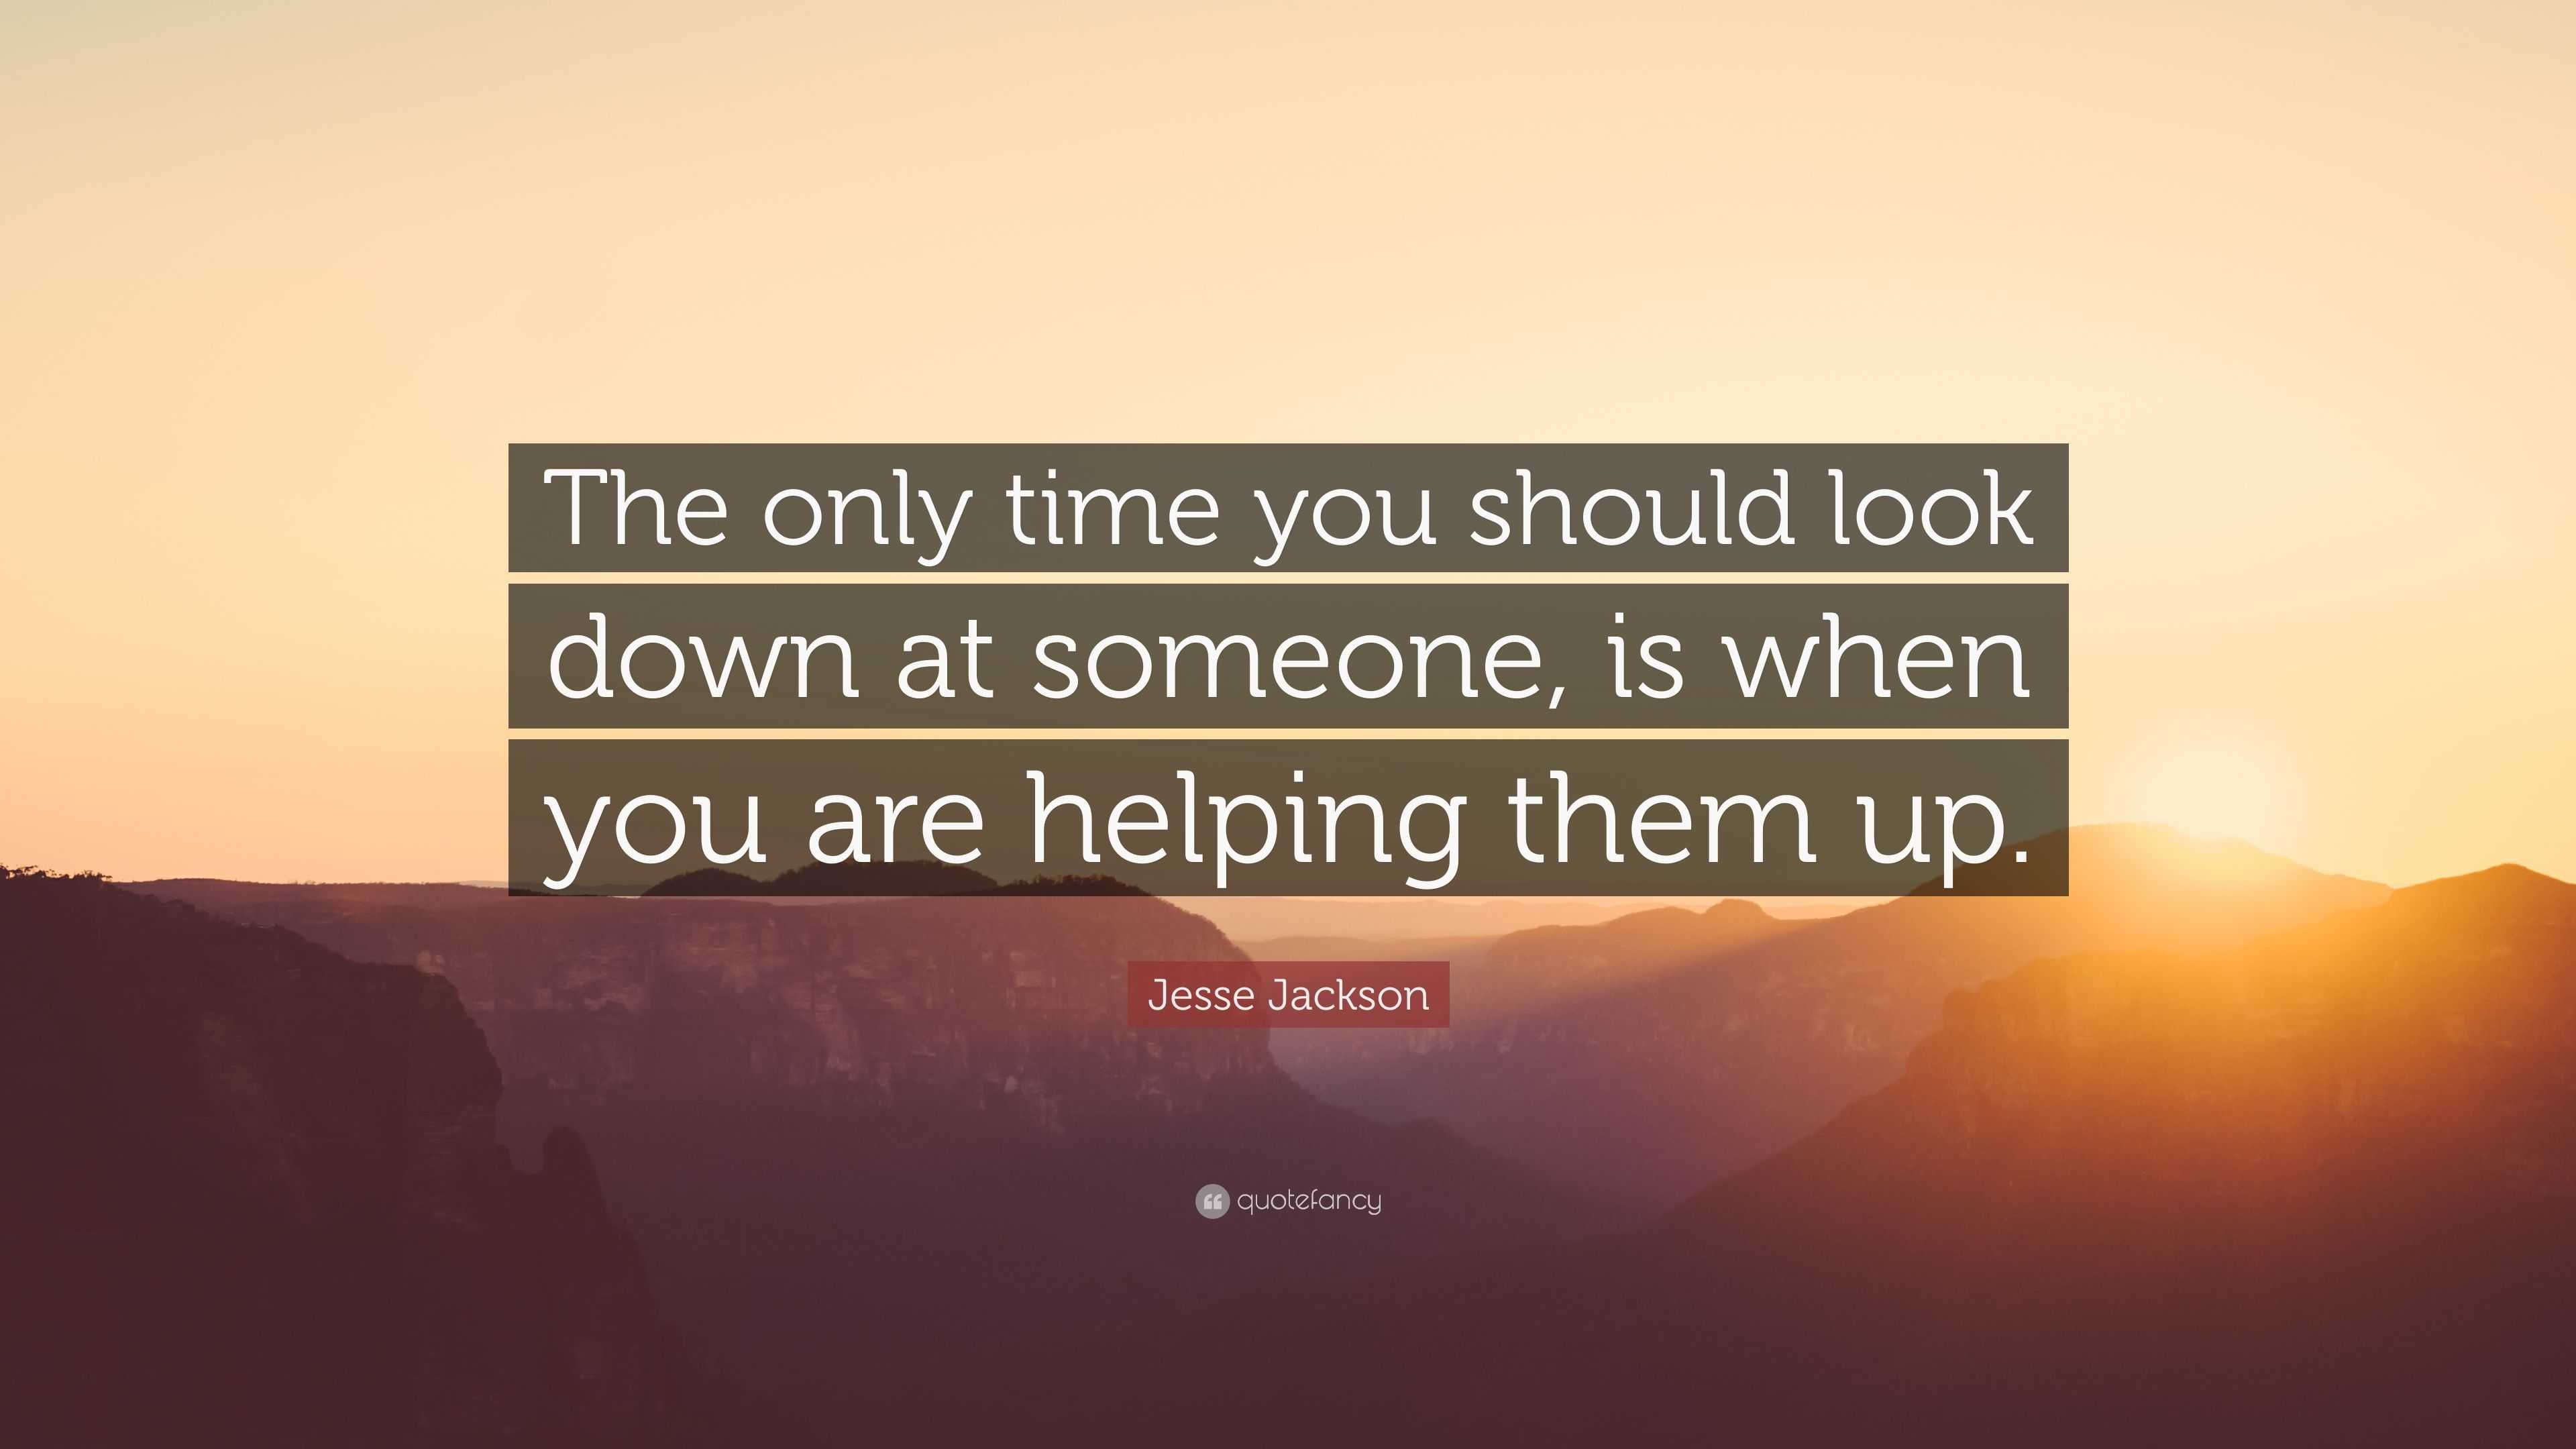 Jesse Jackson Quote The Only Time You Should Look Down At Someone Is When You Are